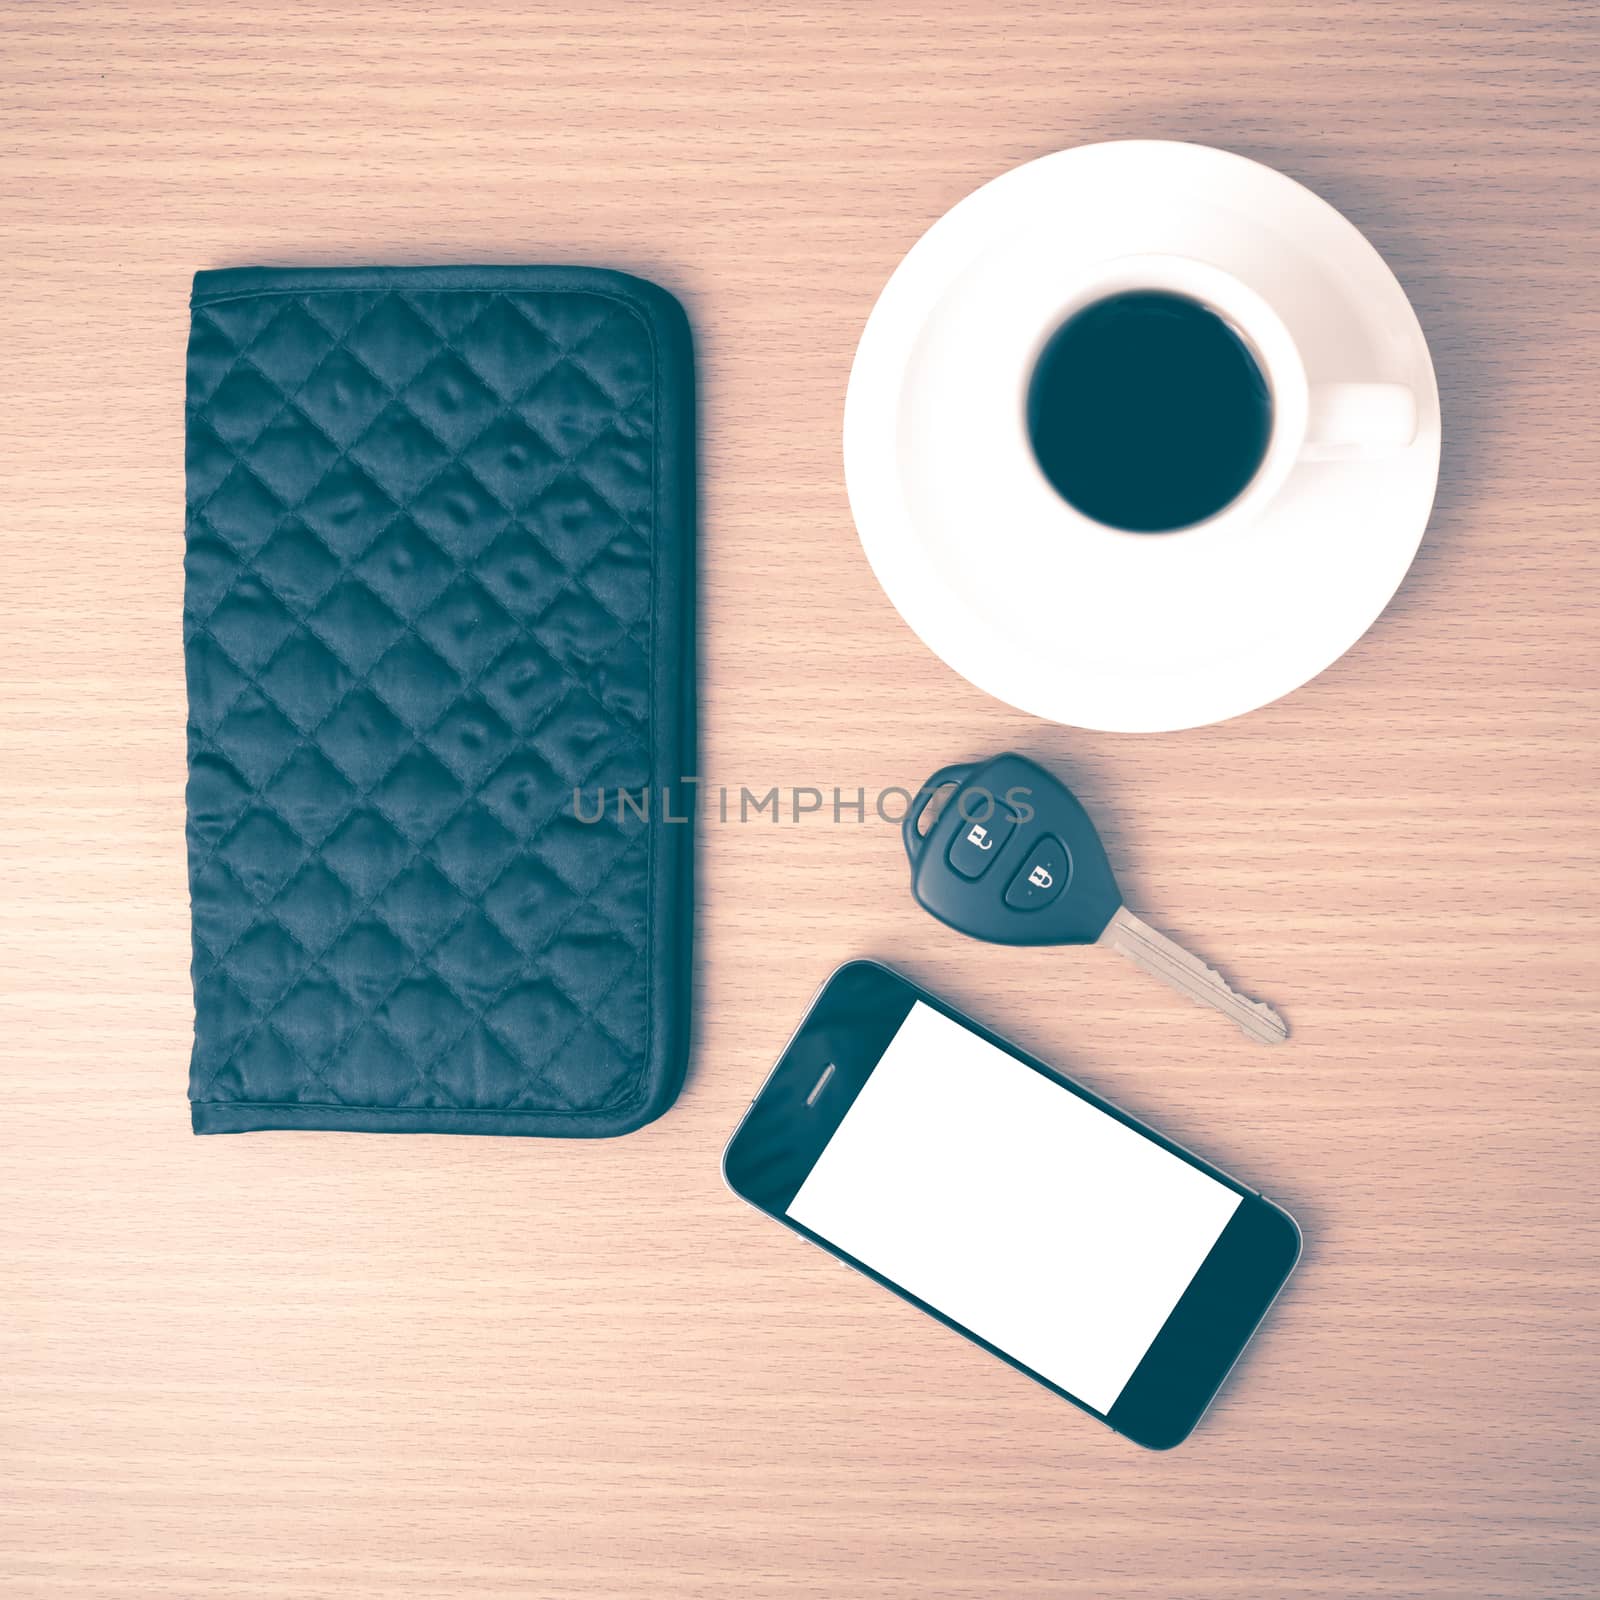 coffee cup with phone car key and wallet on wood background vintage style